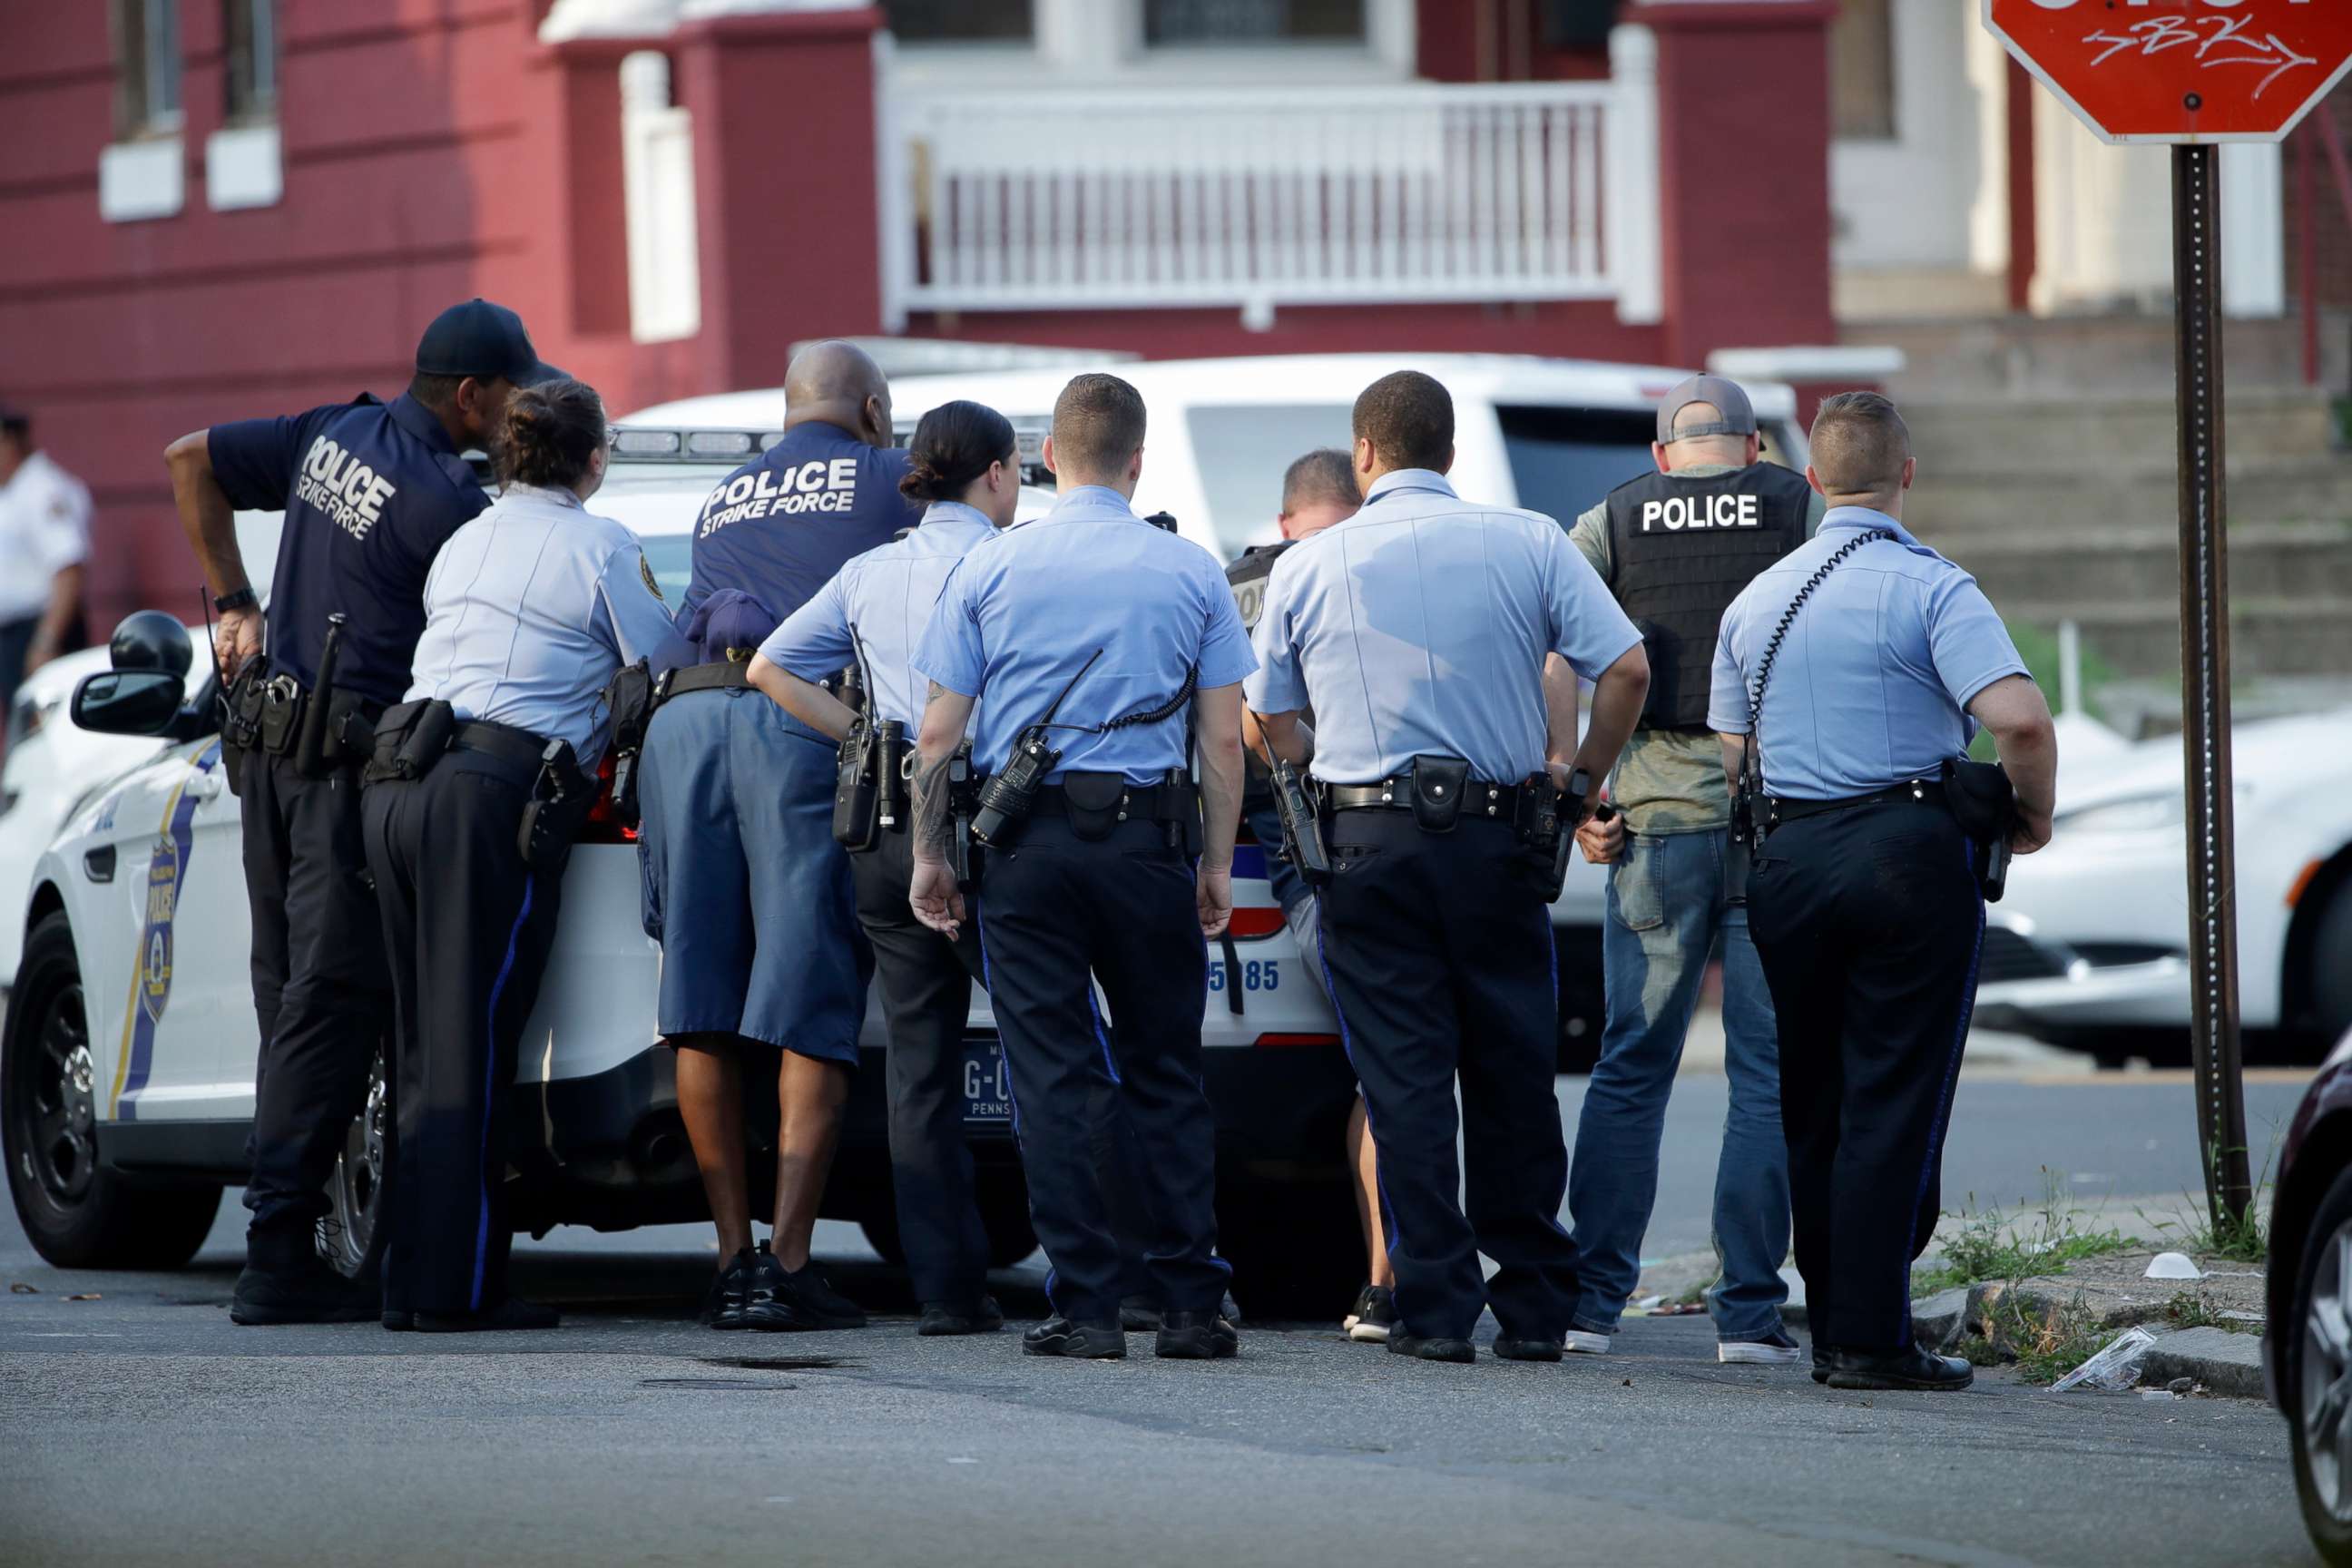 PHOTO: Philadelphia police stage as they respond to an active shooting situation, Aug. 14, 2019, in the Nicetown neighborhood of Philadelphia.